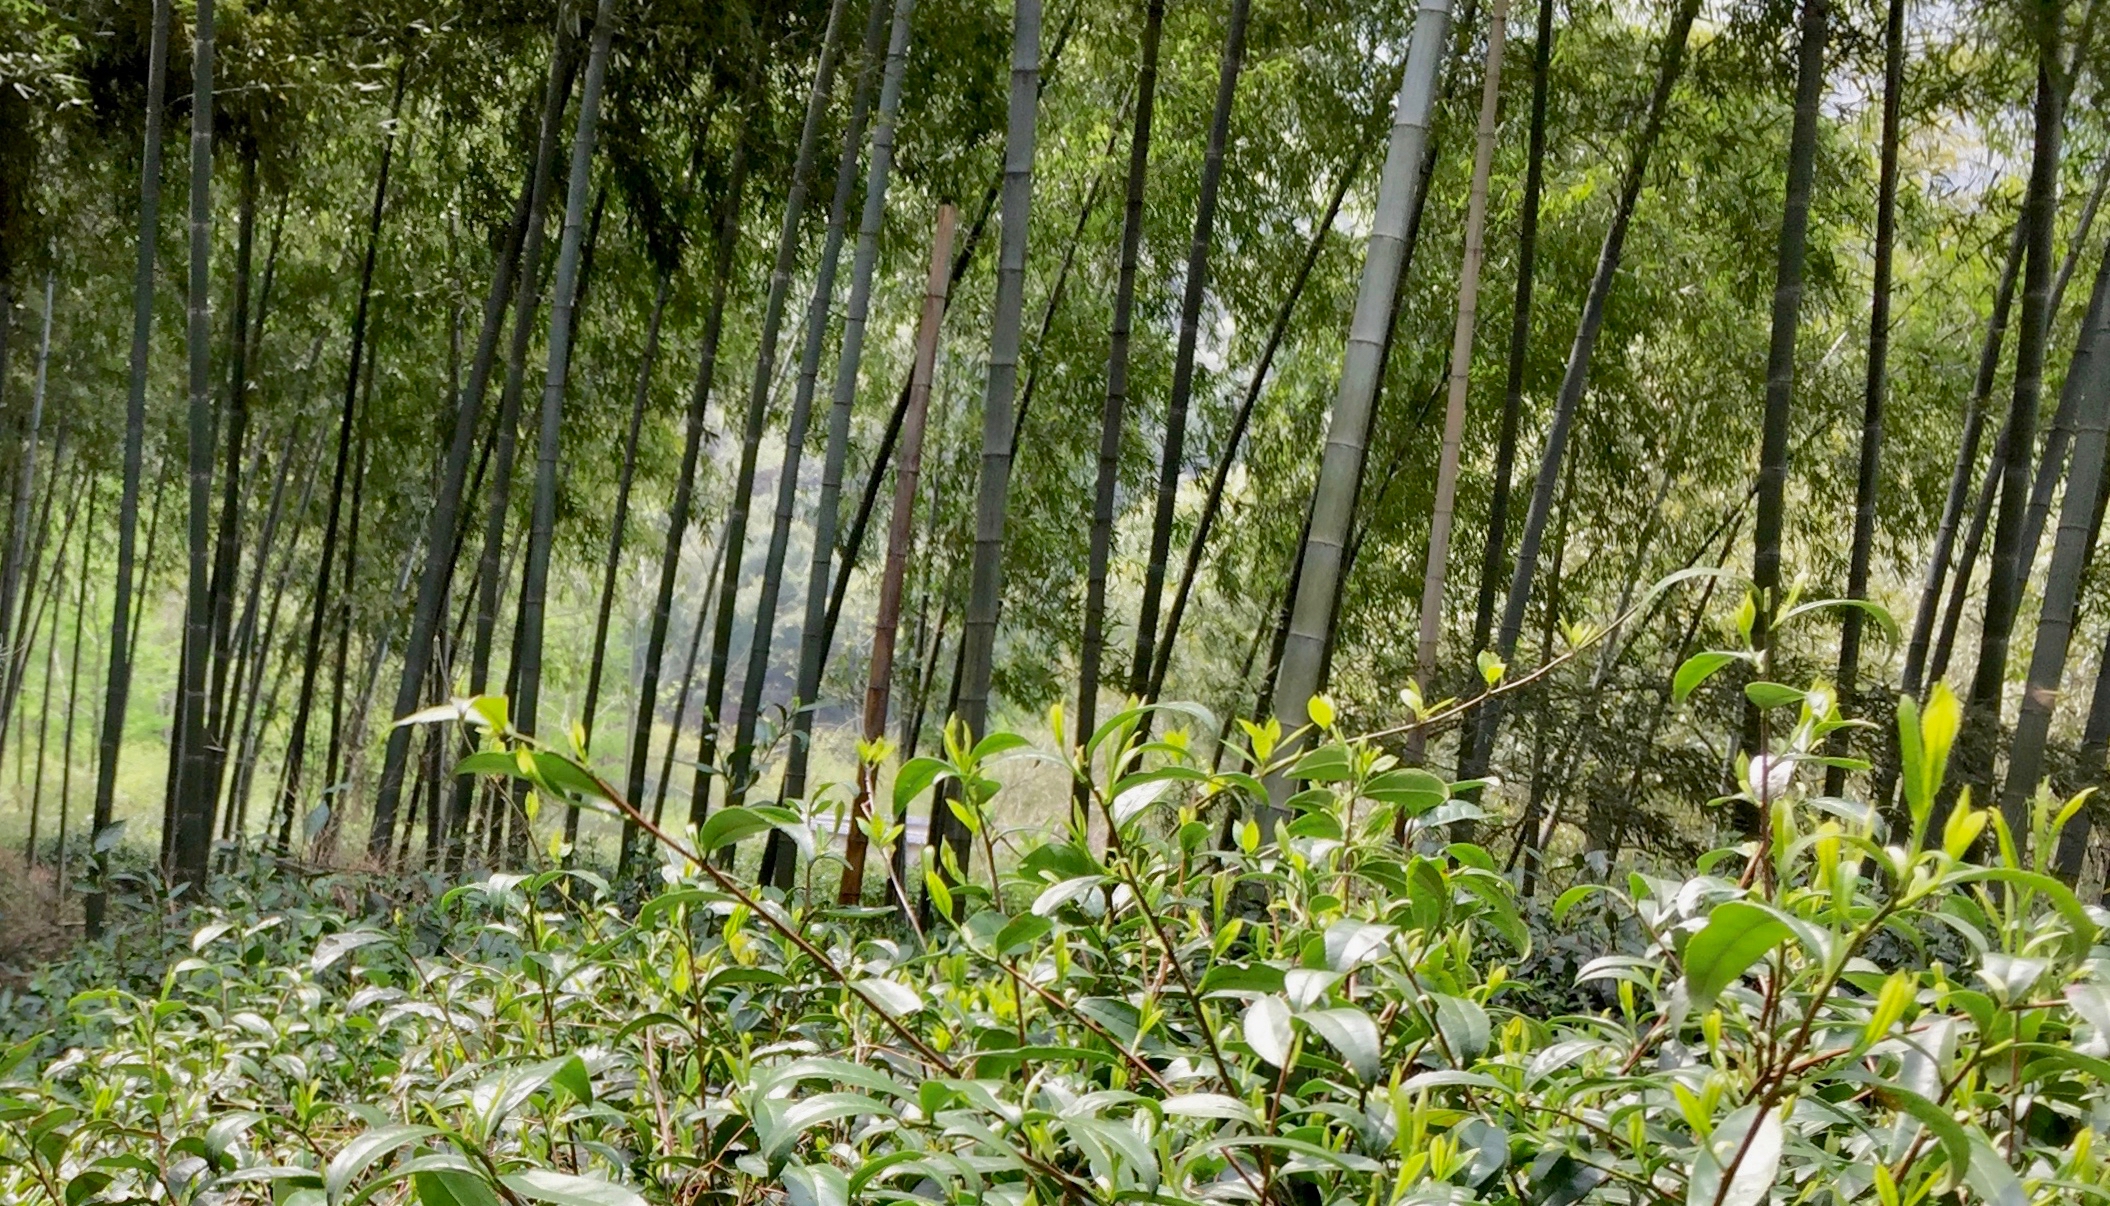 A patch of sunlit Guzhu Zisun tea bushes underneath towering stalks of bamboo in Zhejiang Province.